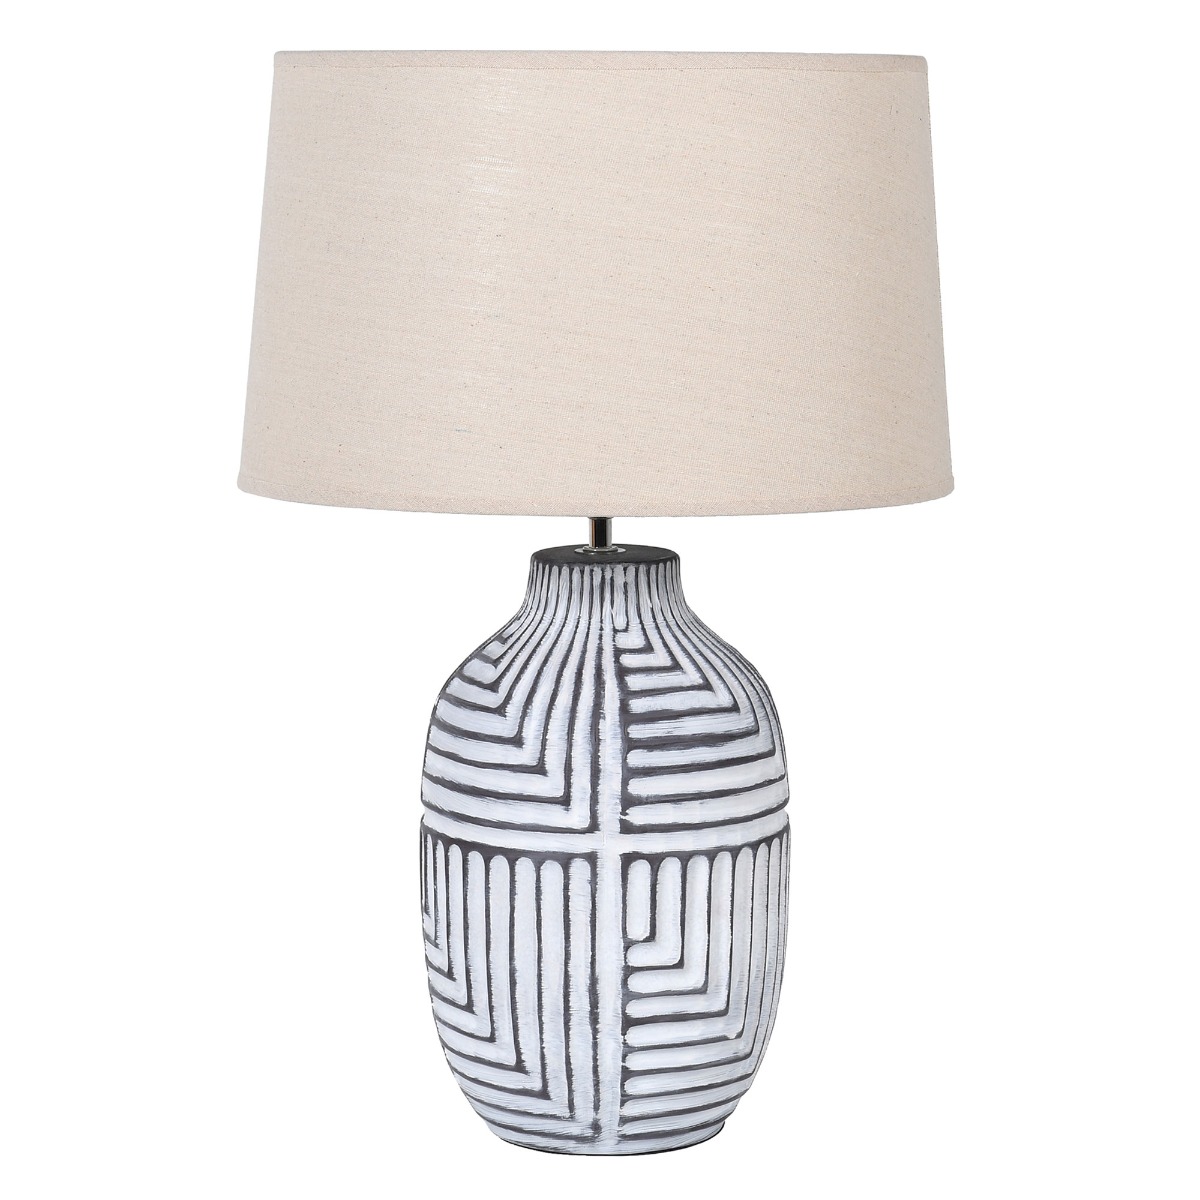 Abstract Table Lamp, White Ceramic | Barker & Stonehouse